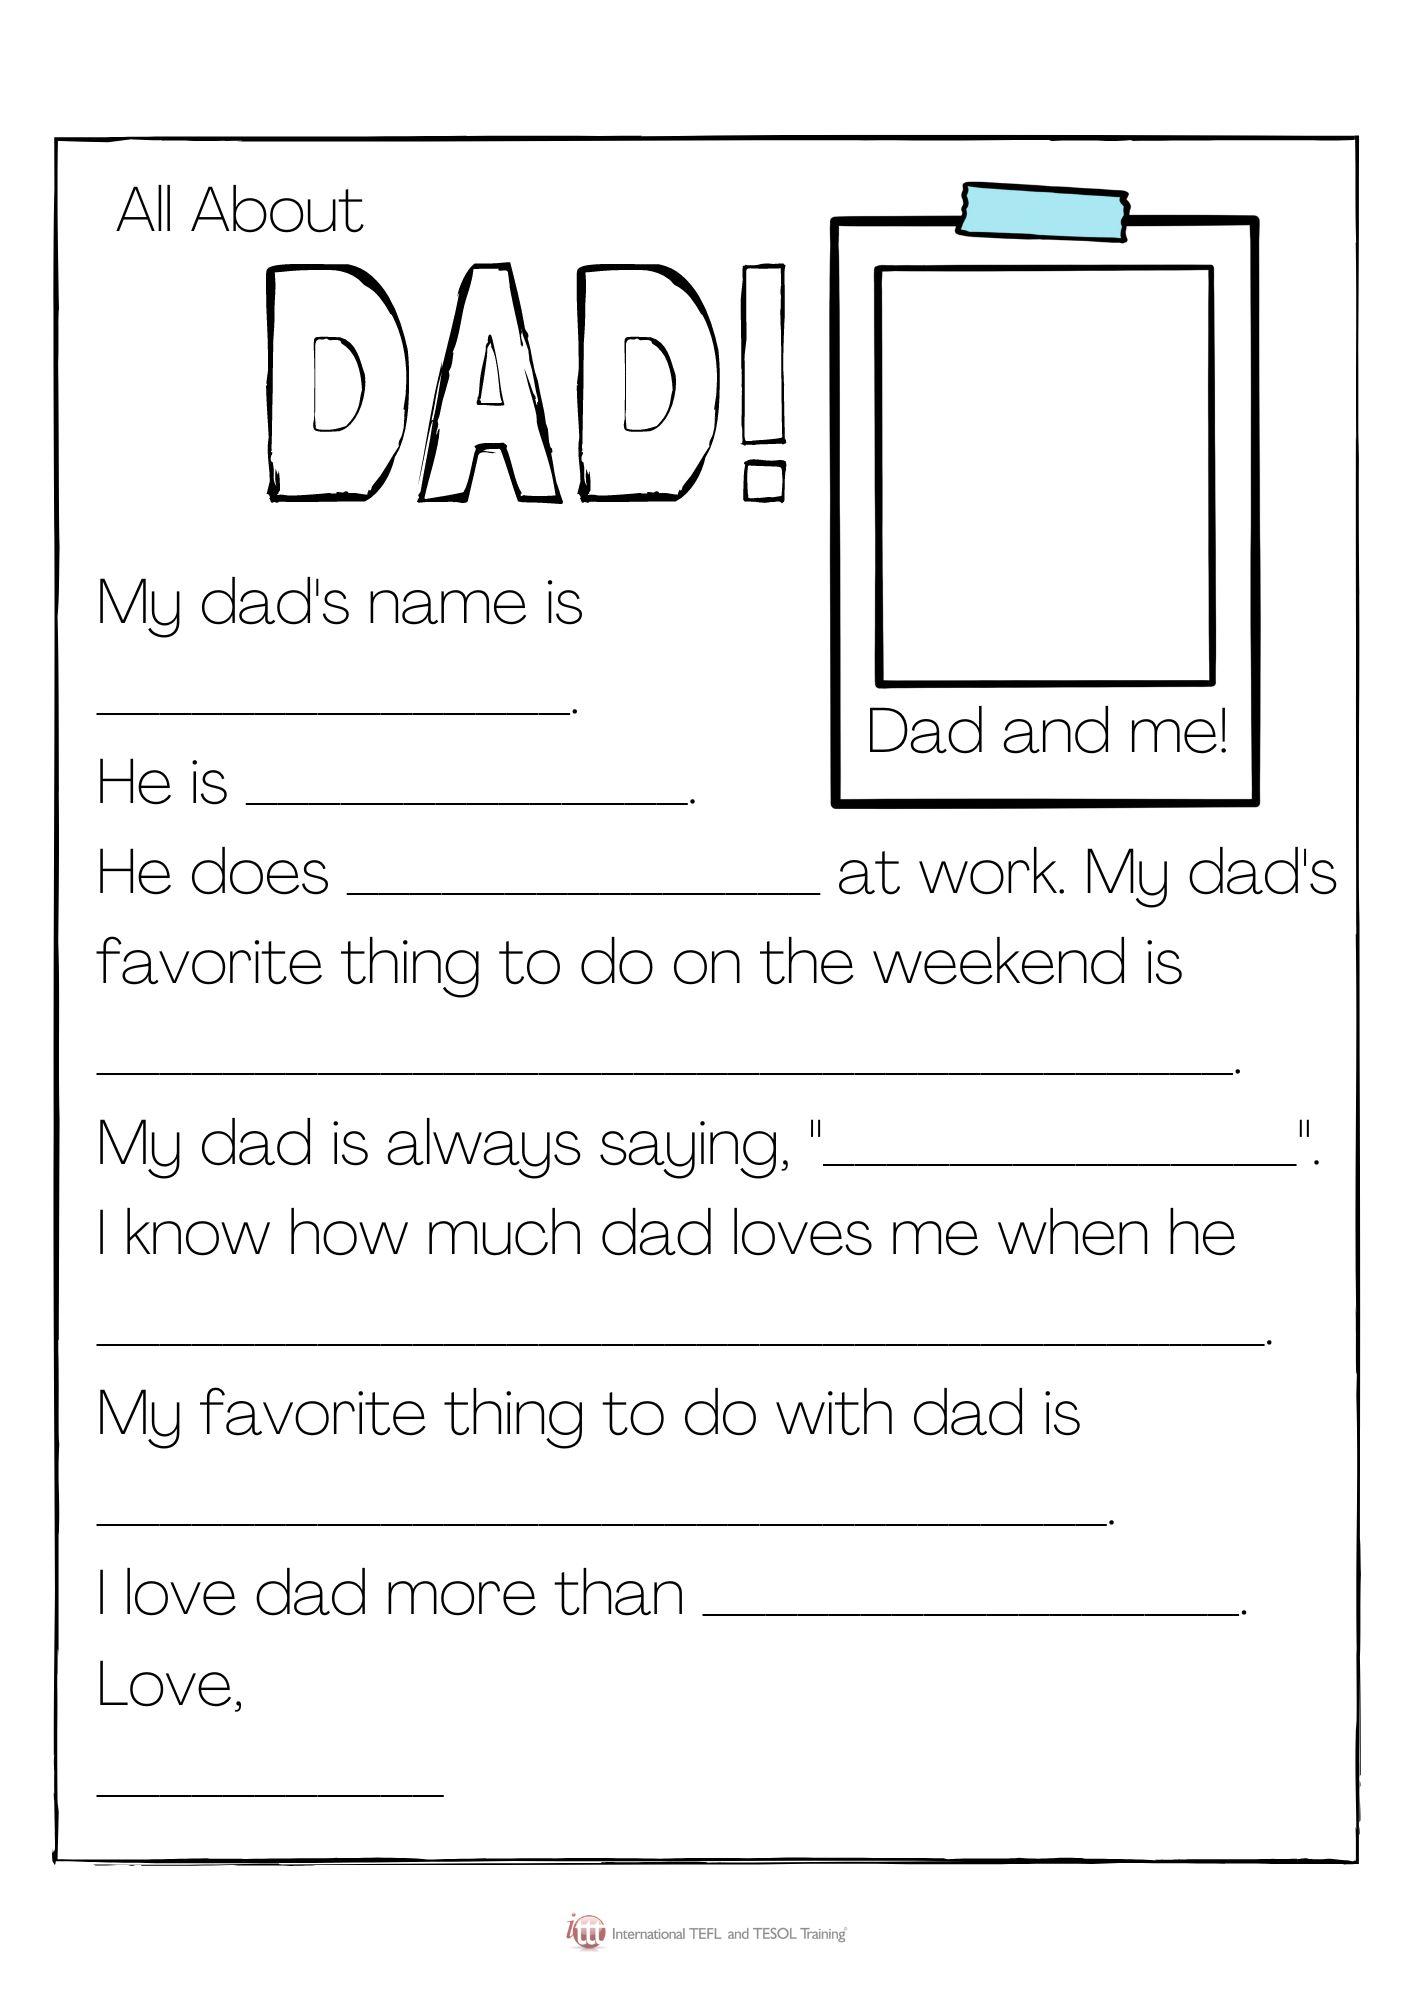 Grammar Corner All About Dad Father's Day Activity